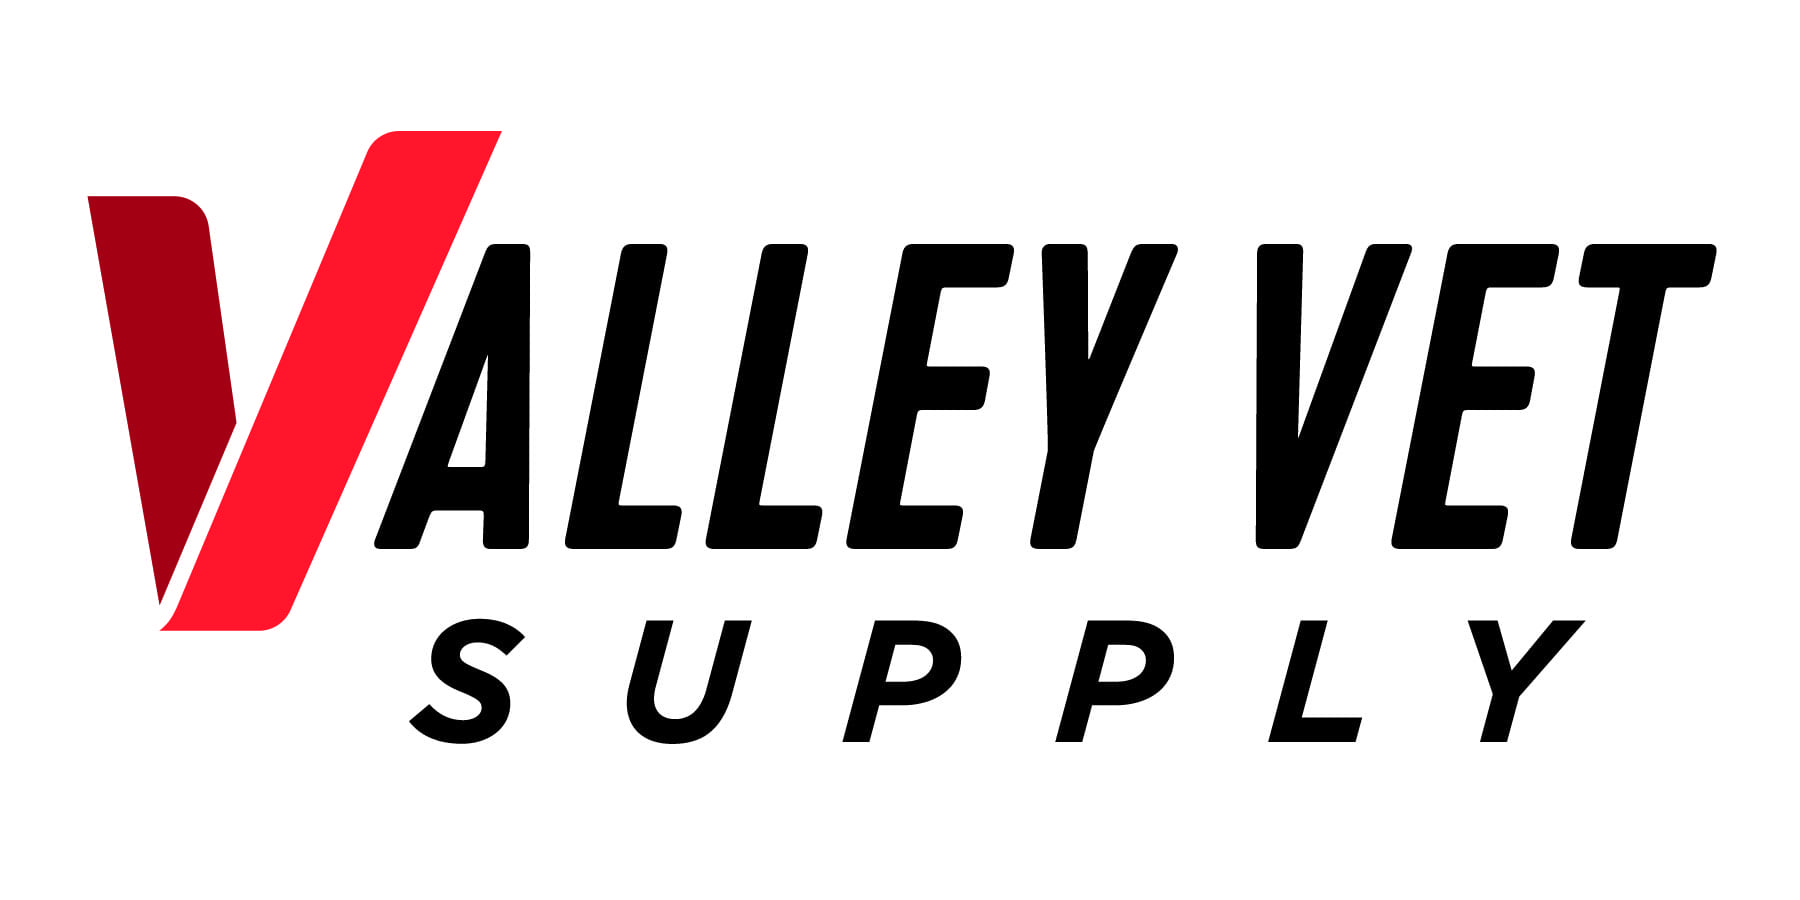 Shop Curicyn products at ValleyVetSupply